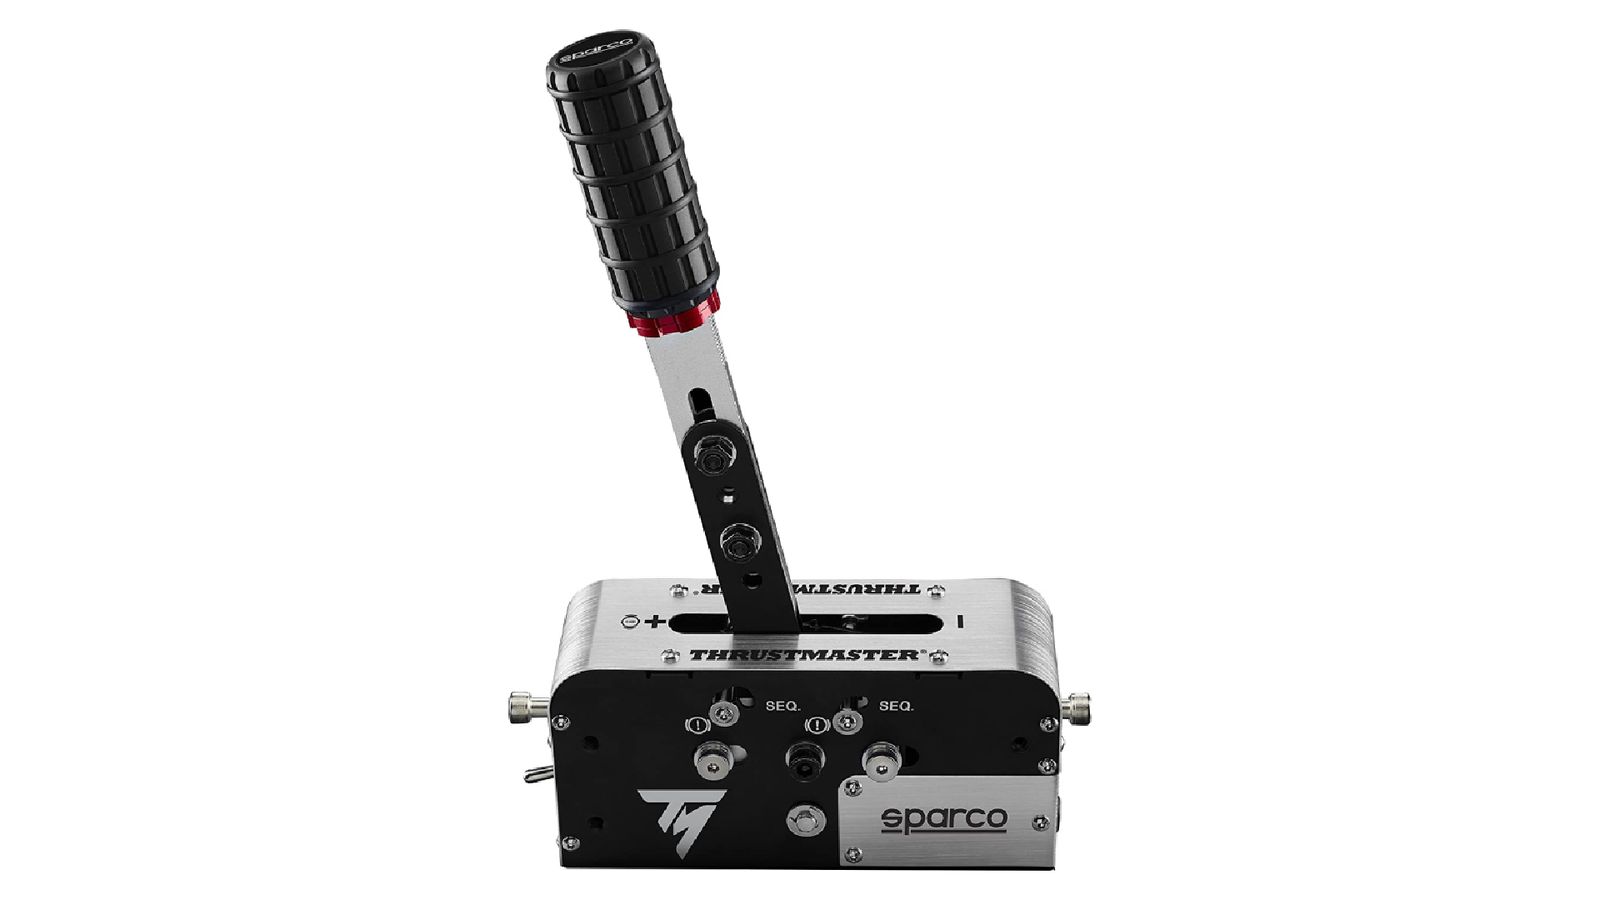 Thrustmaster TSS Handbrake Sparco Mod+ product image silver, black, and red sequential shifter and handbrake.